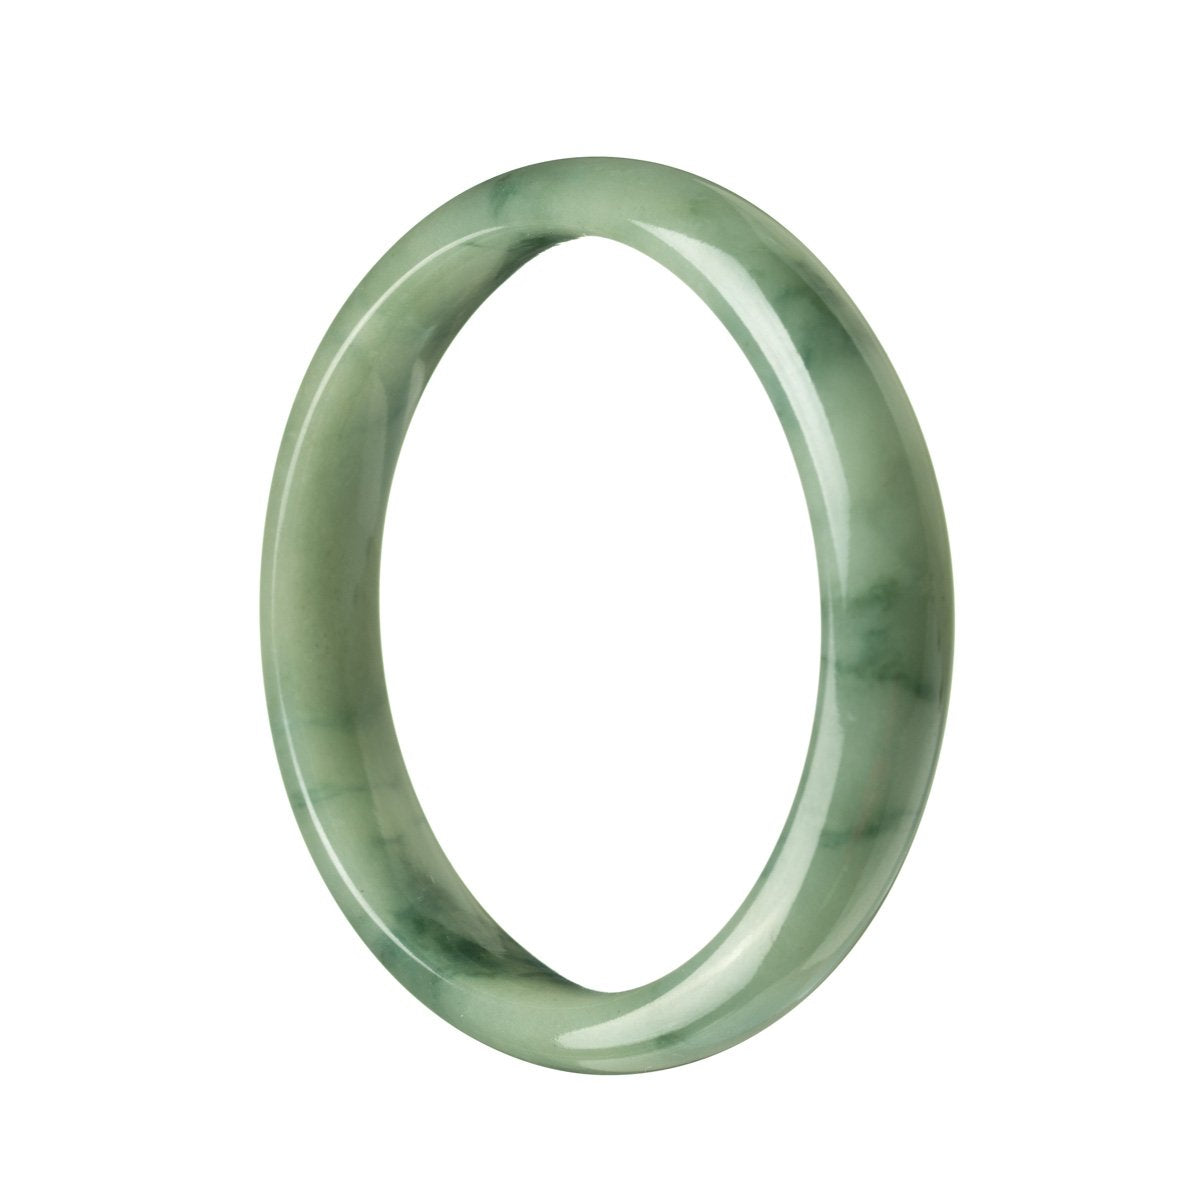 A stunning jade bracelet featuring a mix of vibrant green hues, crafted from authentic Grade A Burmese jade. The bracelet showcases a half moon design and measures 58mm in size. A true gem from MAYS GEMS.